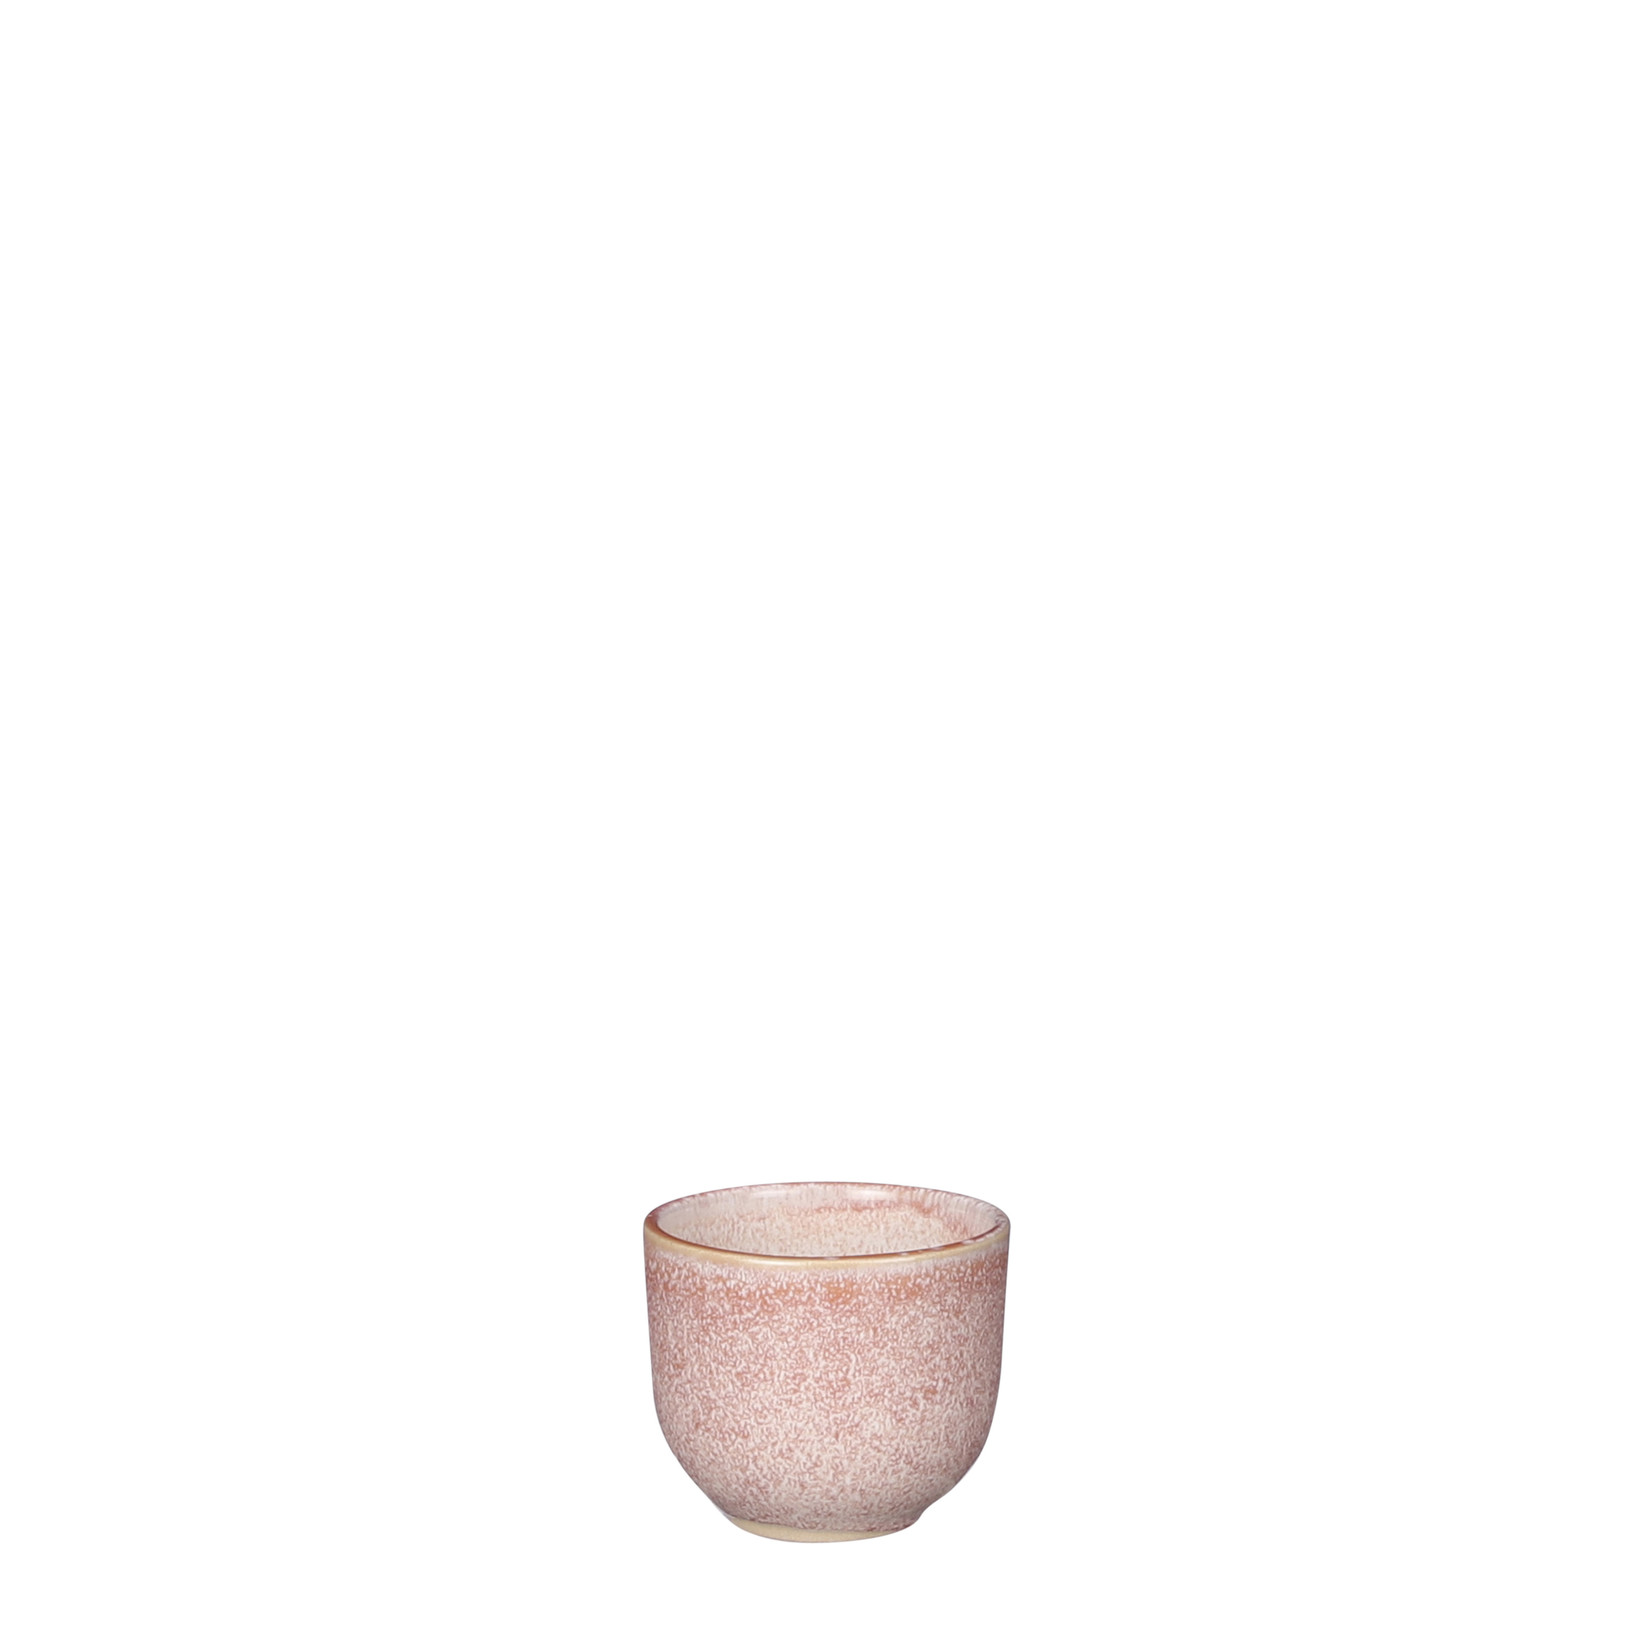 MiCa Tabo egg cup